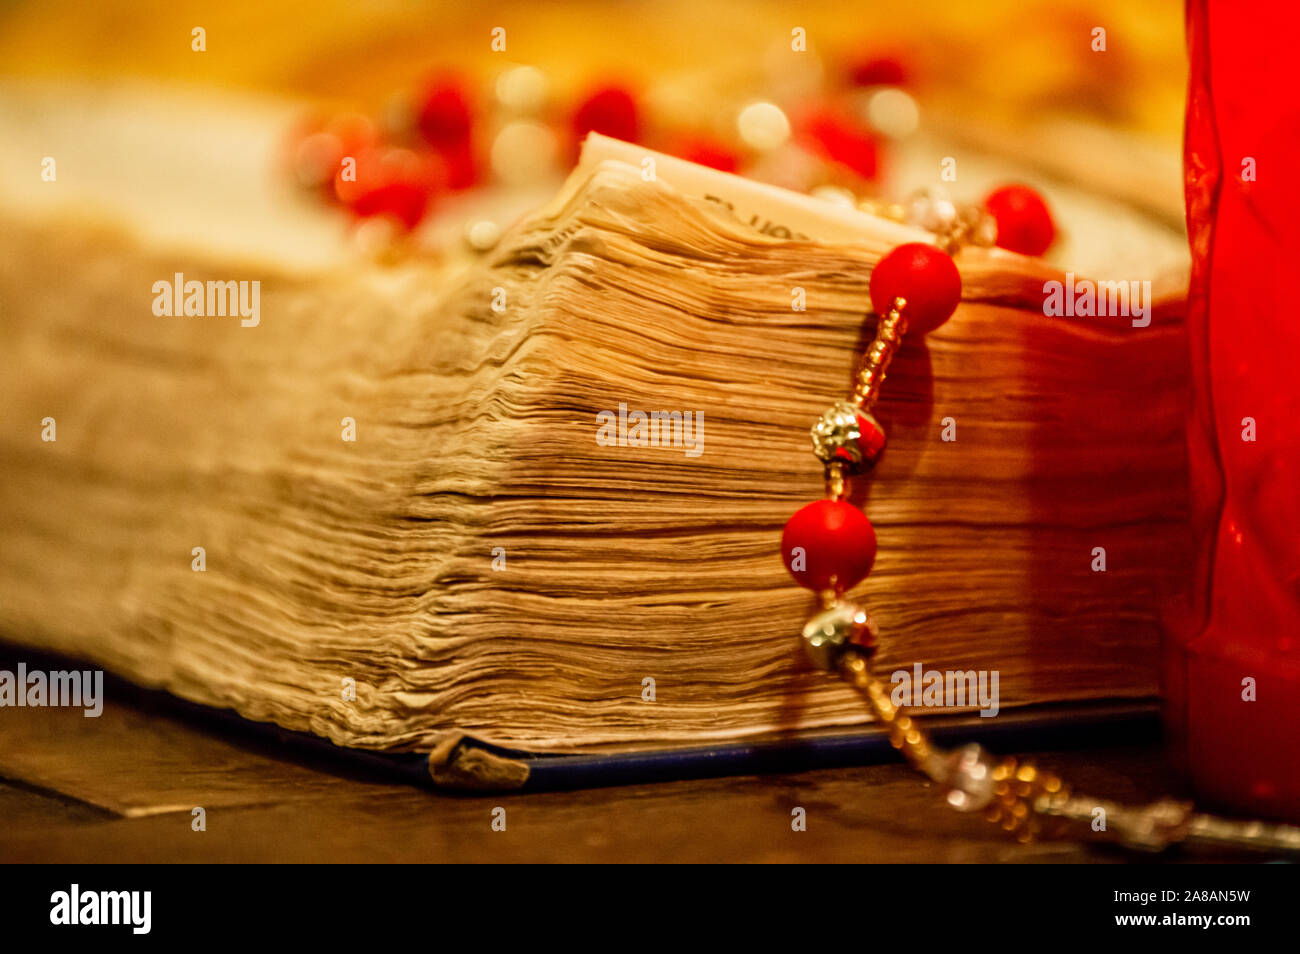 Corner pages of an old worn Bible book and a Catholic rosary beads. Stock Photo